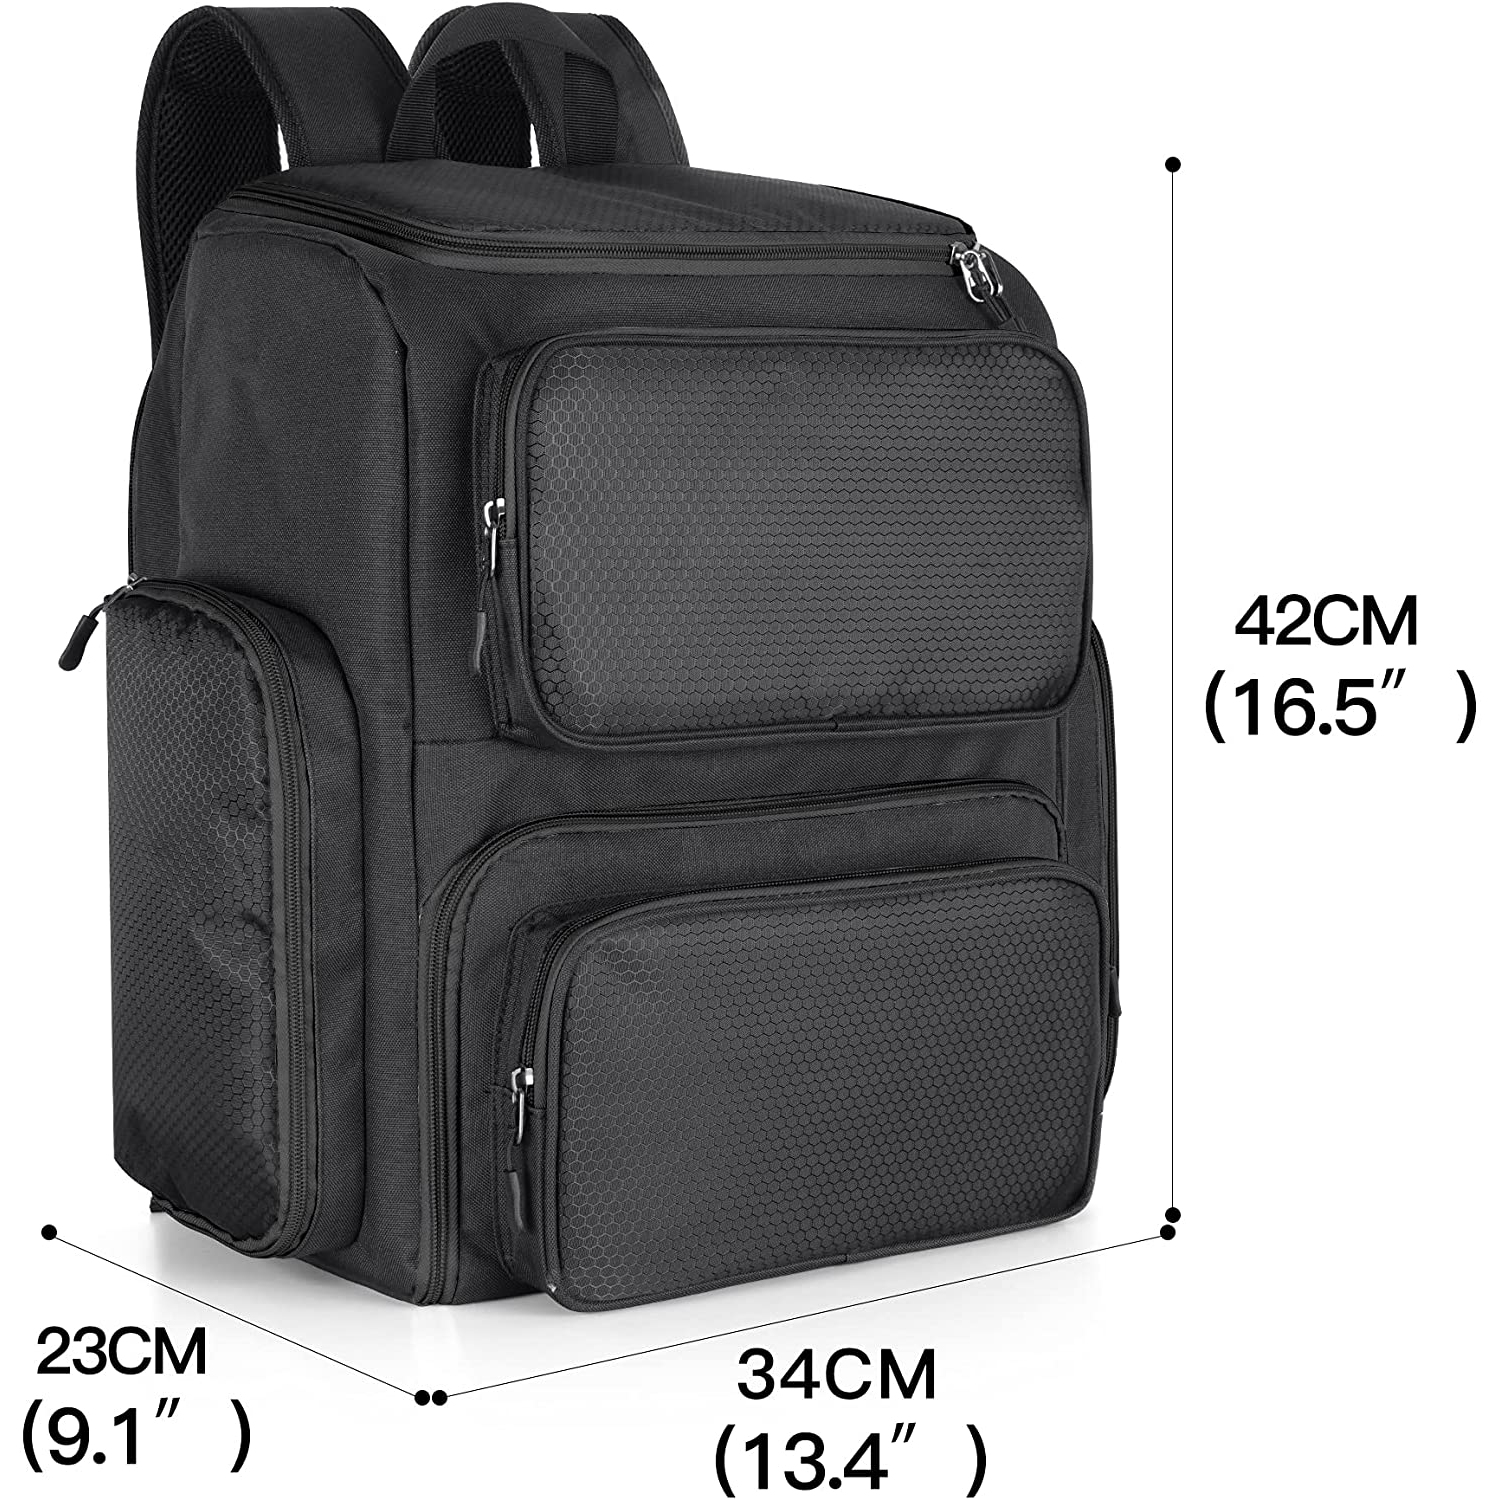 Travel Carrying Backpack Compatible with Xbox Series X, Storage Case Bag with Inner Divider for Xbox Game Console and Other Gaming Accessories, Black